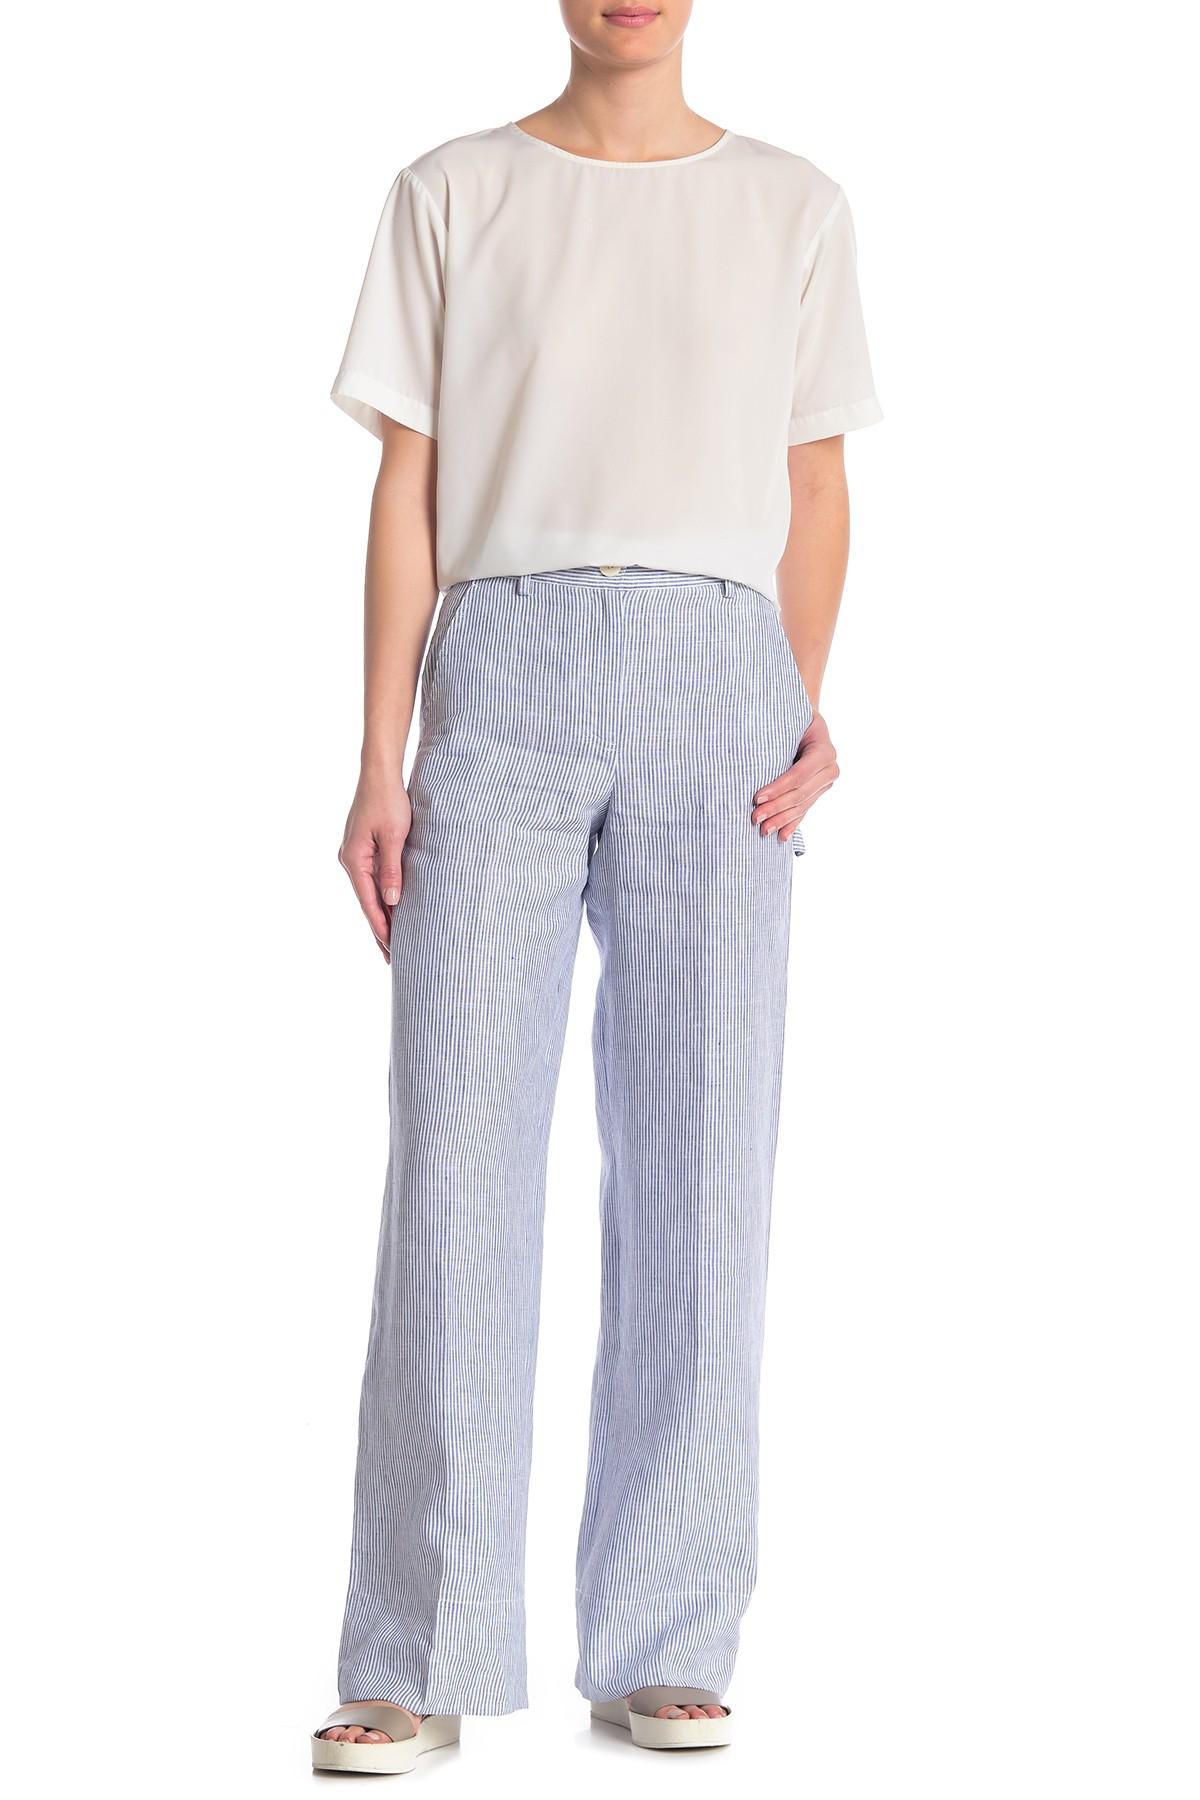 Theory Striped Carpenter Linen Pants in Blue - Lyst